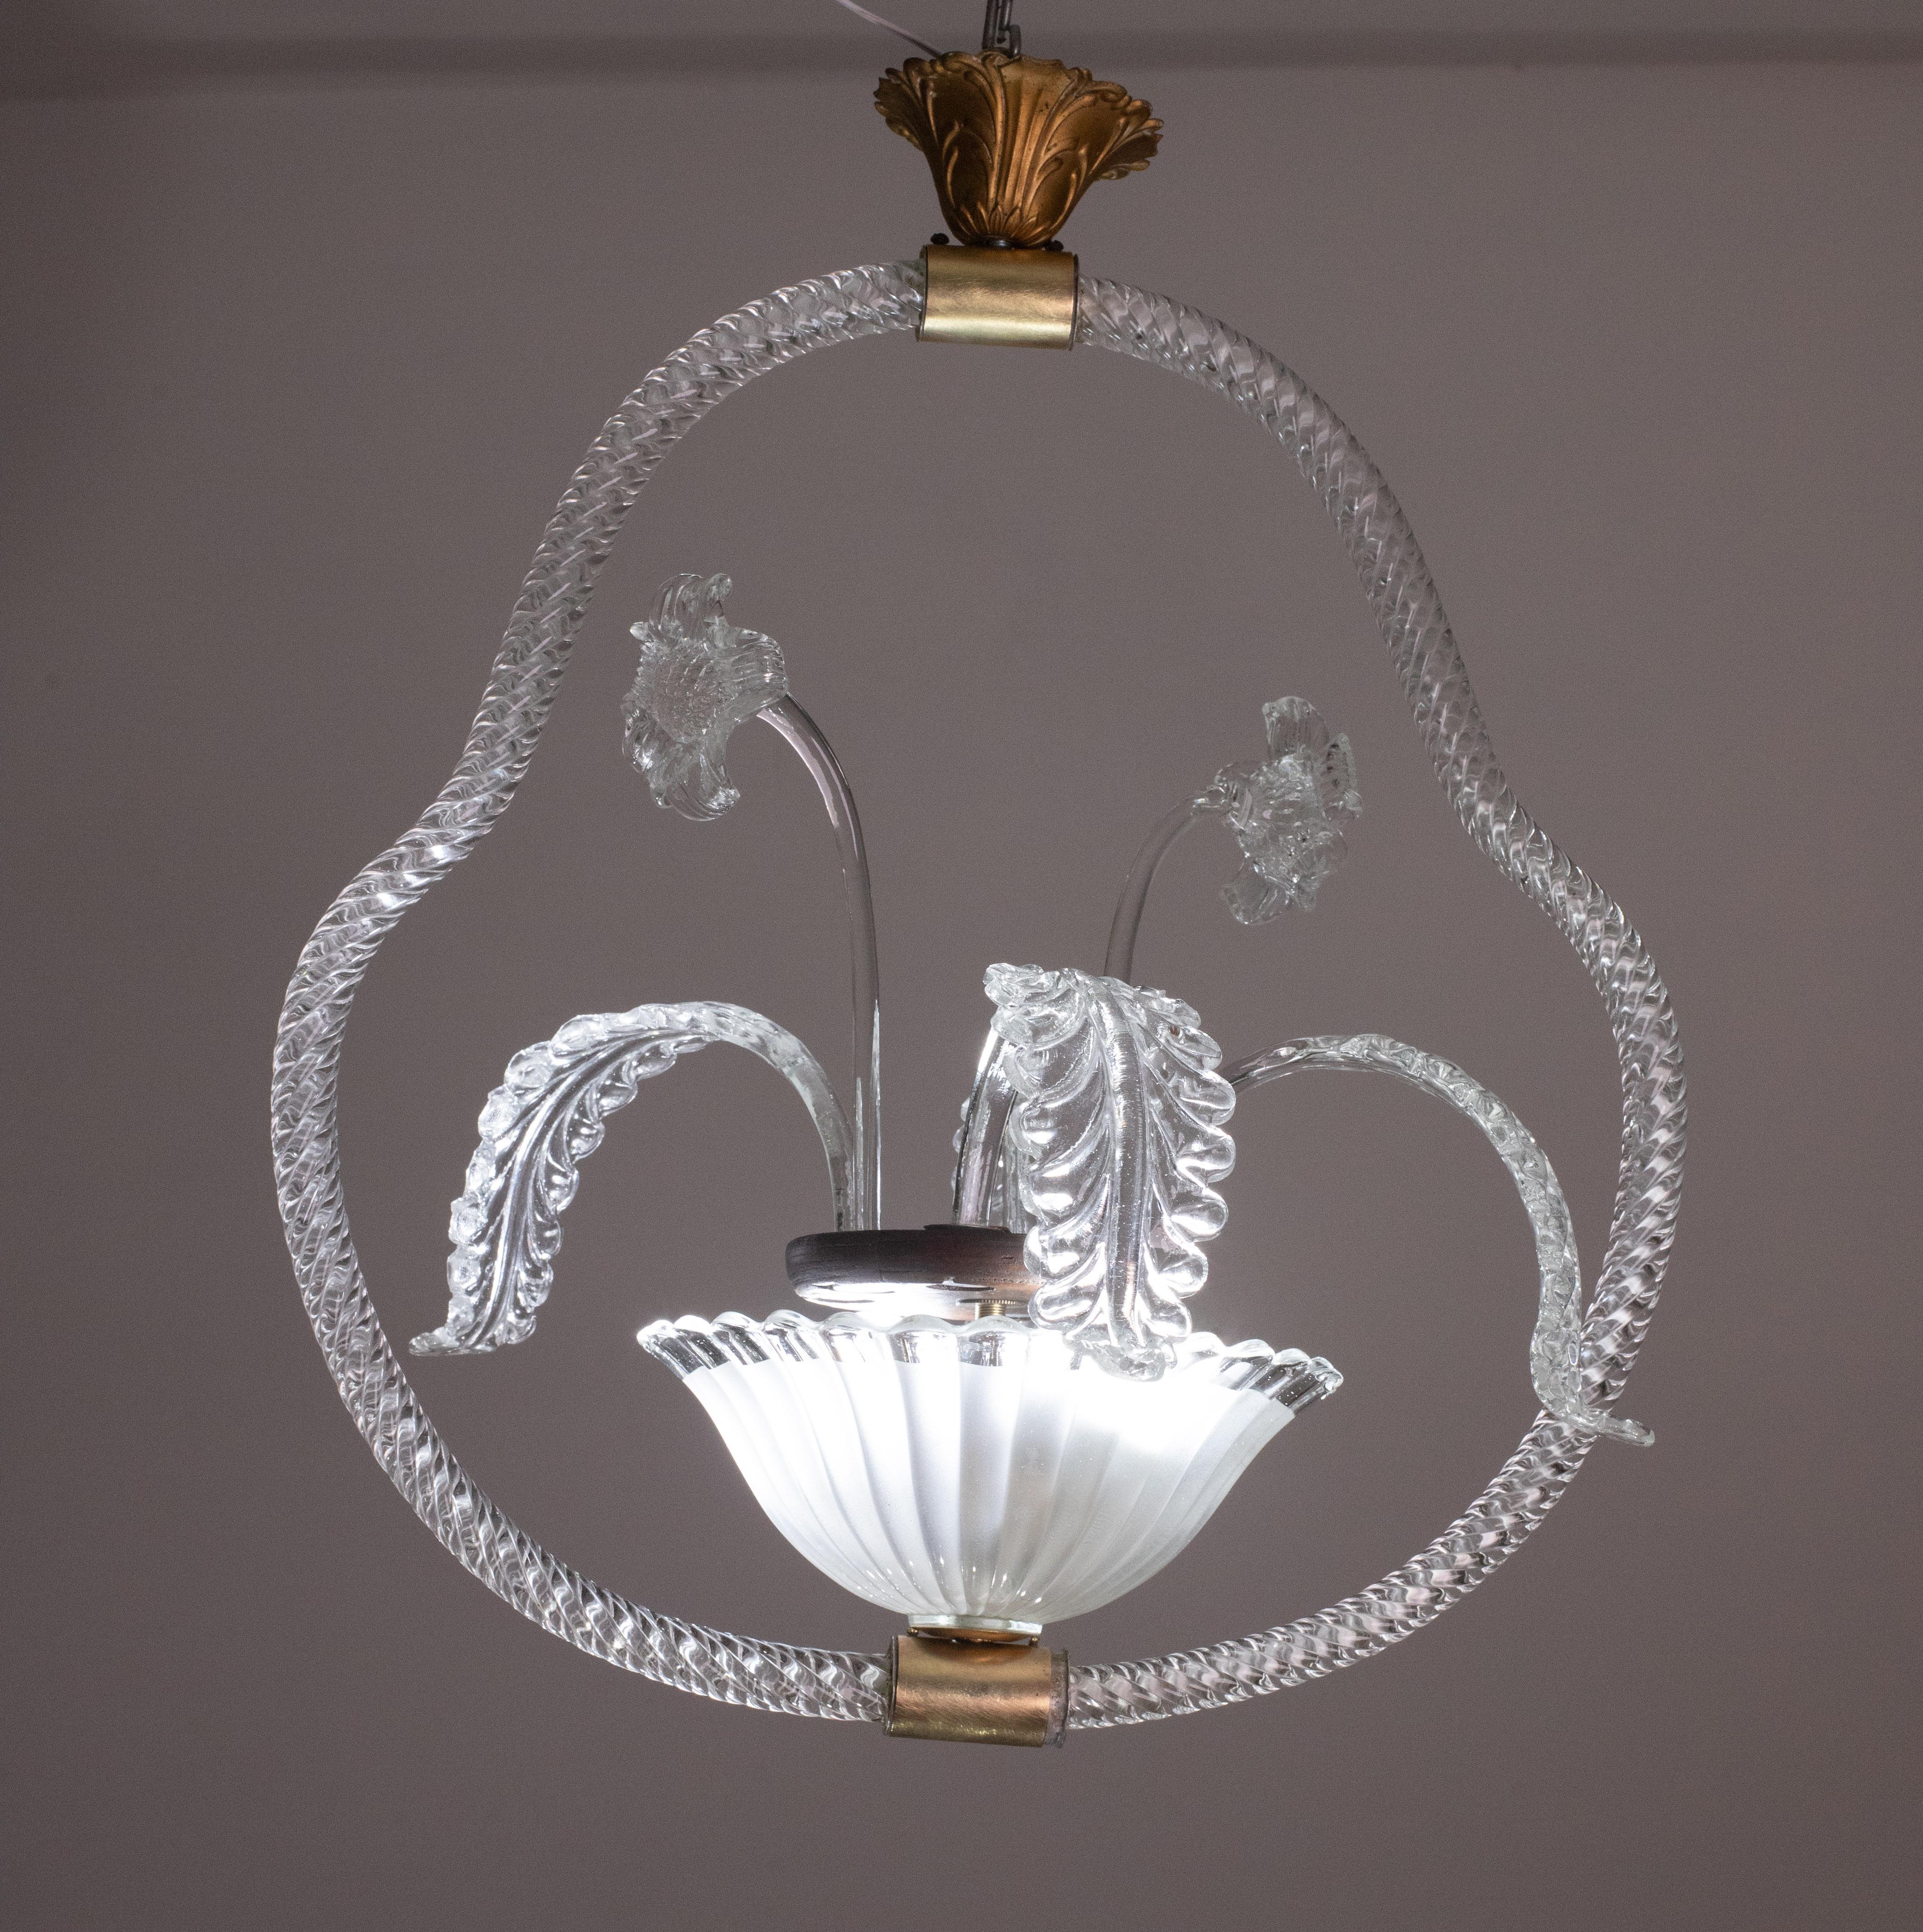 Splendid Murano chandelier made by the Barovier e Toso glassworks in the 1940s, rich of flowers and leaves.

The chandelier measures 55 cm in height and 45 in diameter.

Fits 2 lights.